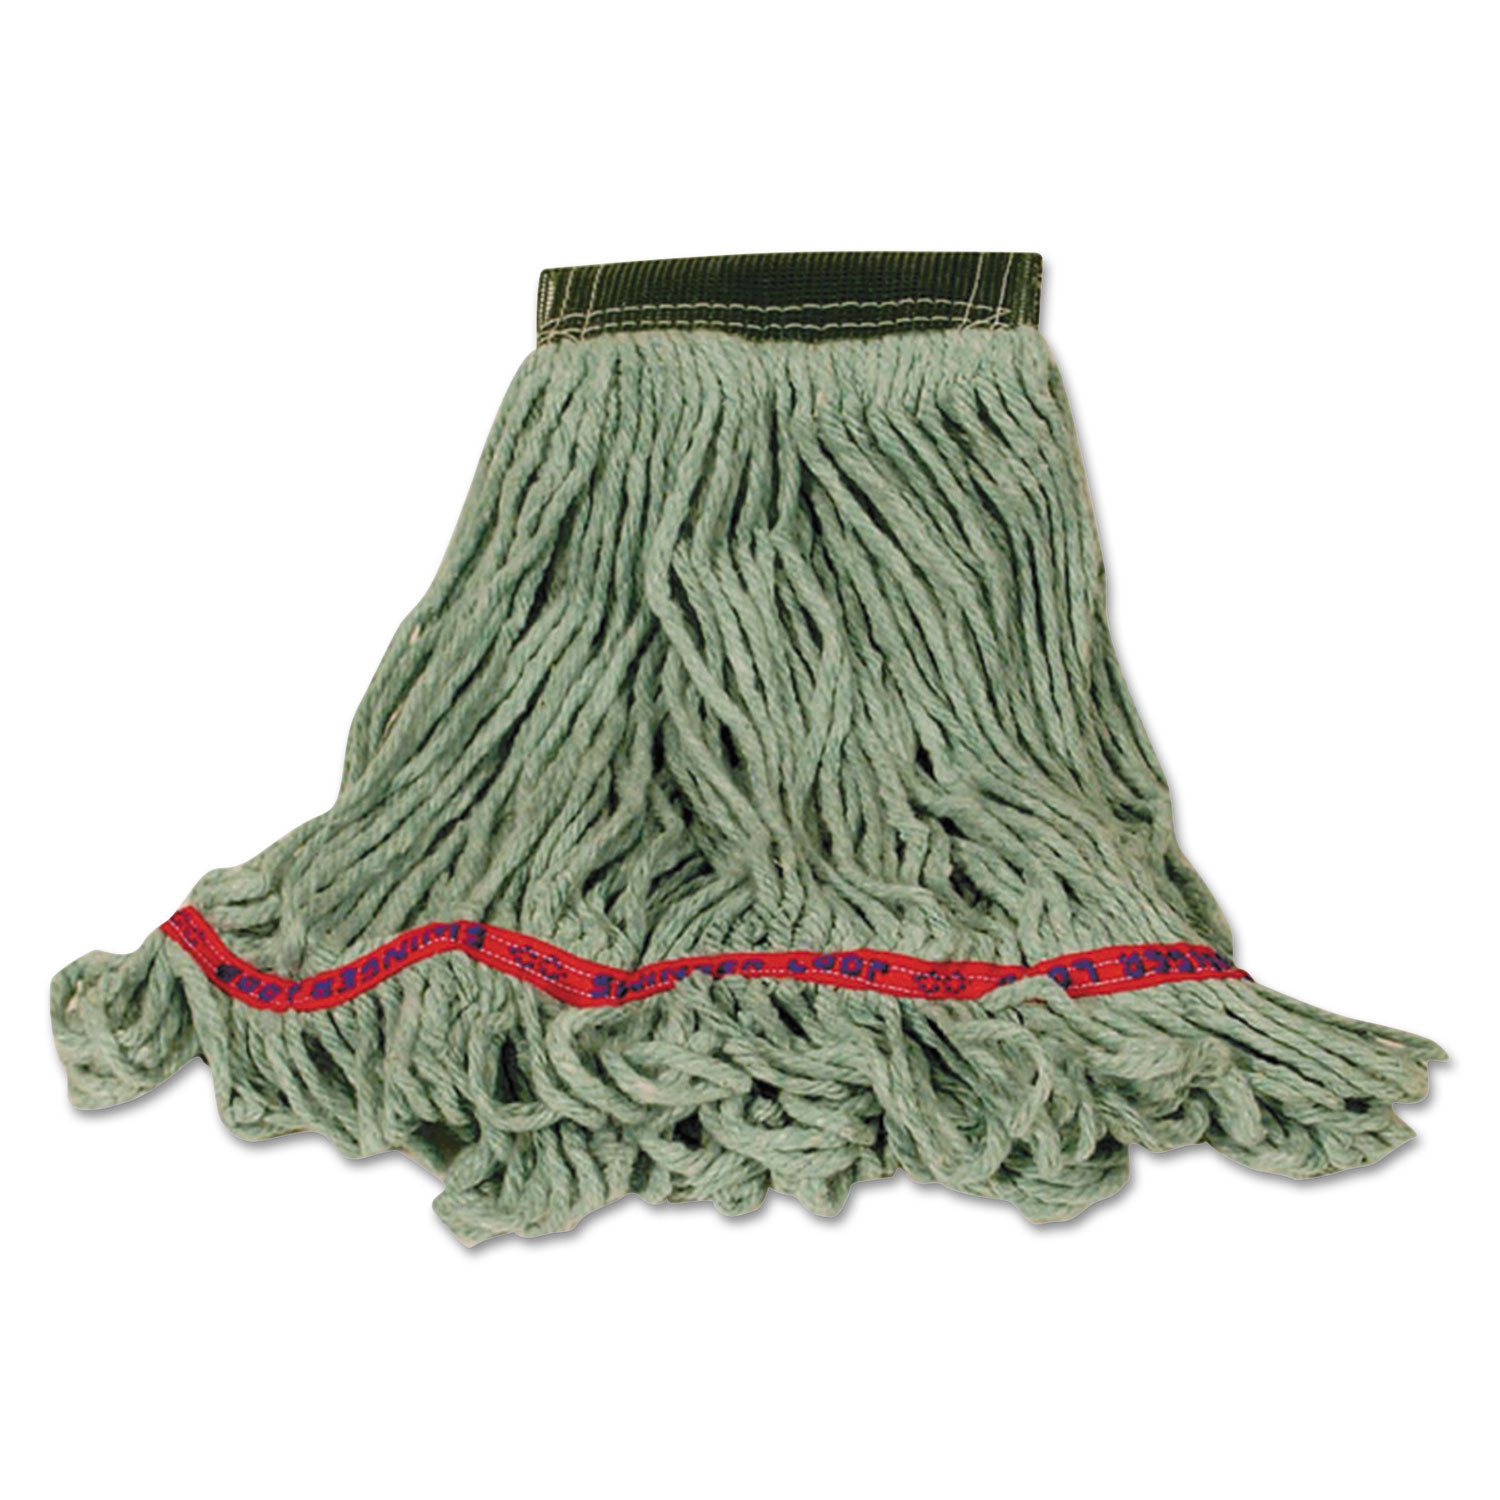  Rubbermaid Commercial FGC15206GR00 Swinger Loop Wet Mop Heads, Cotton/Synthetic Blend, Green, Medium, 6/Carton (RCPC152GRE) 